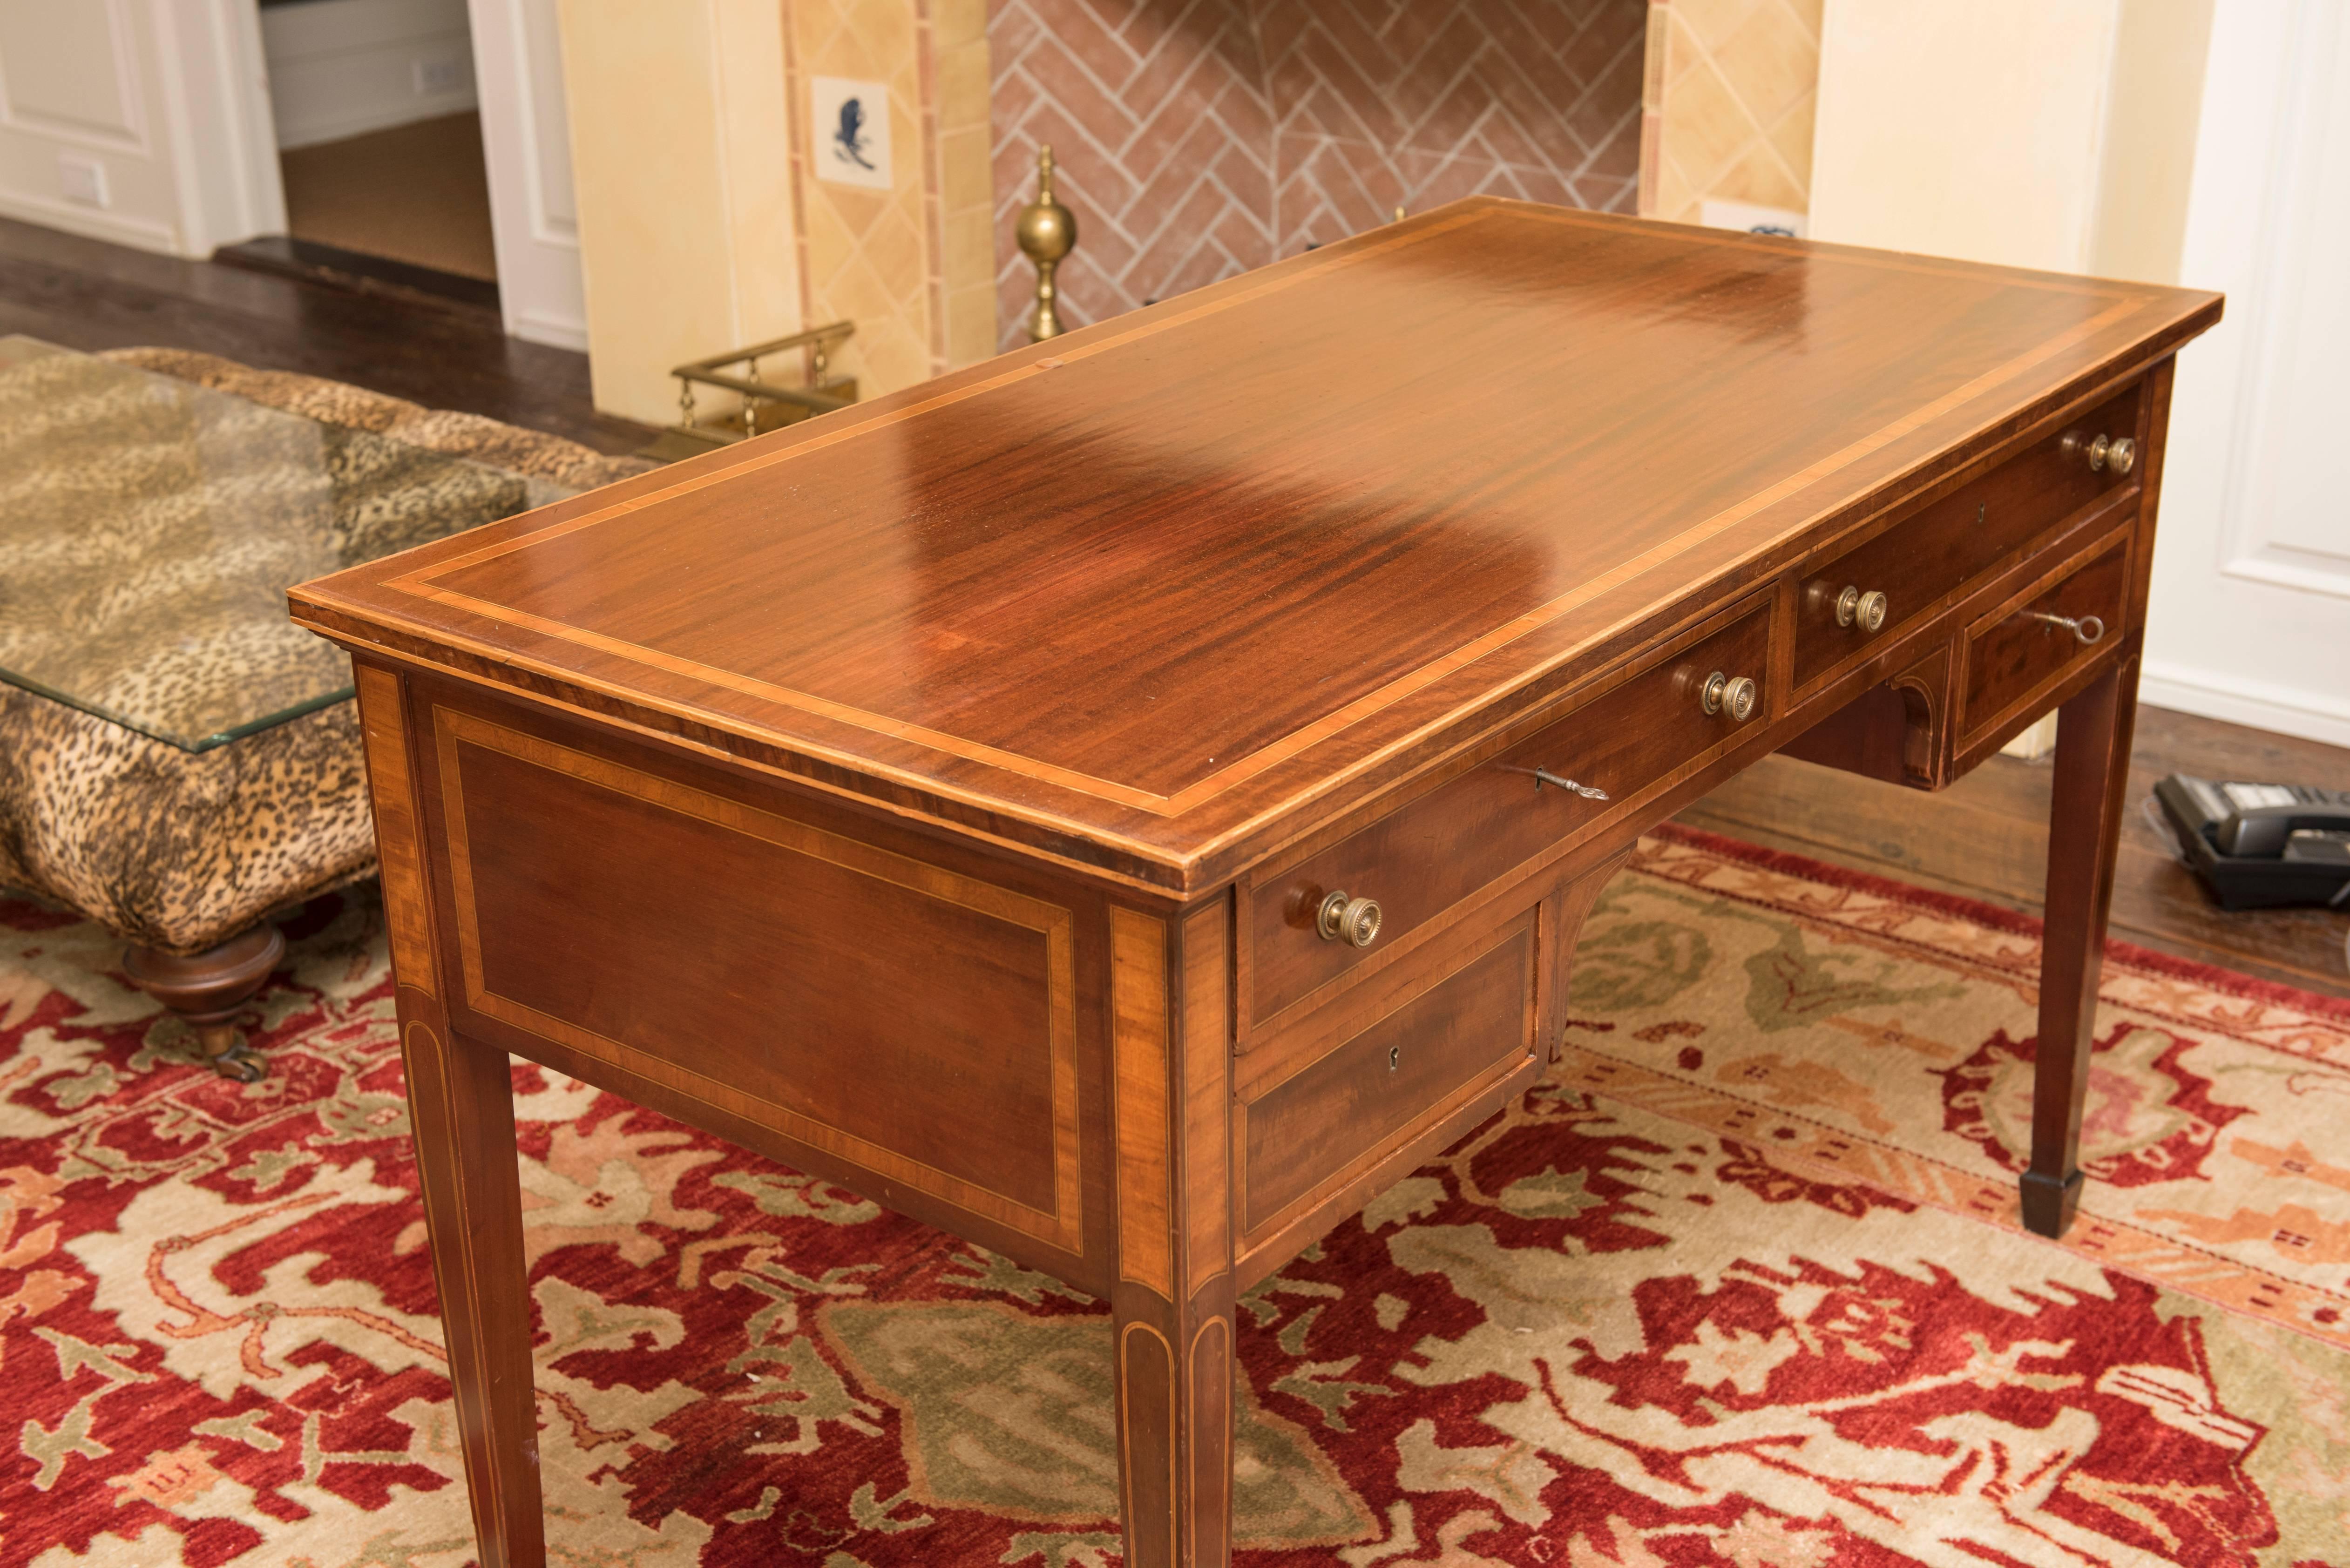 Walnut wood with glass top, excellent condition.